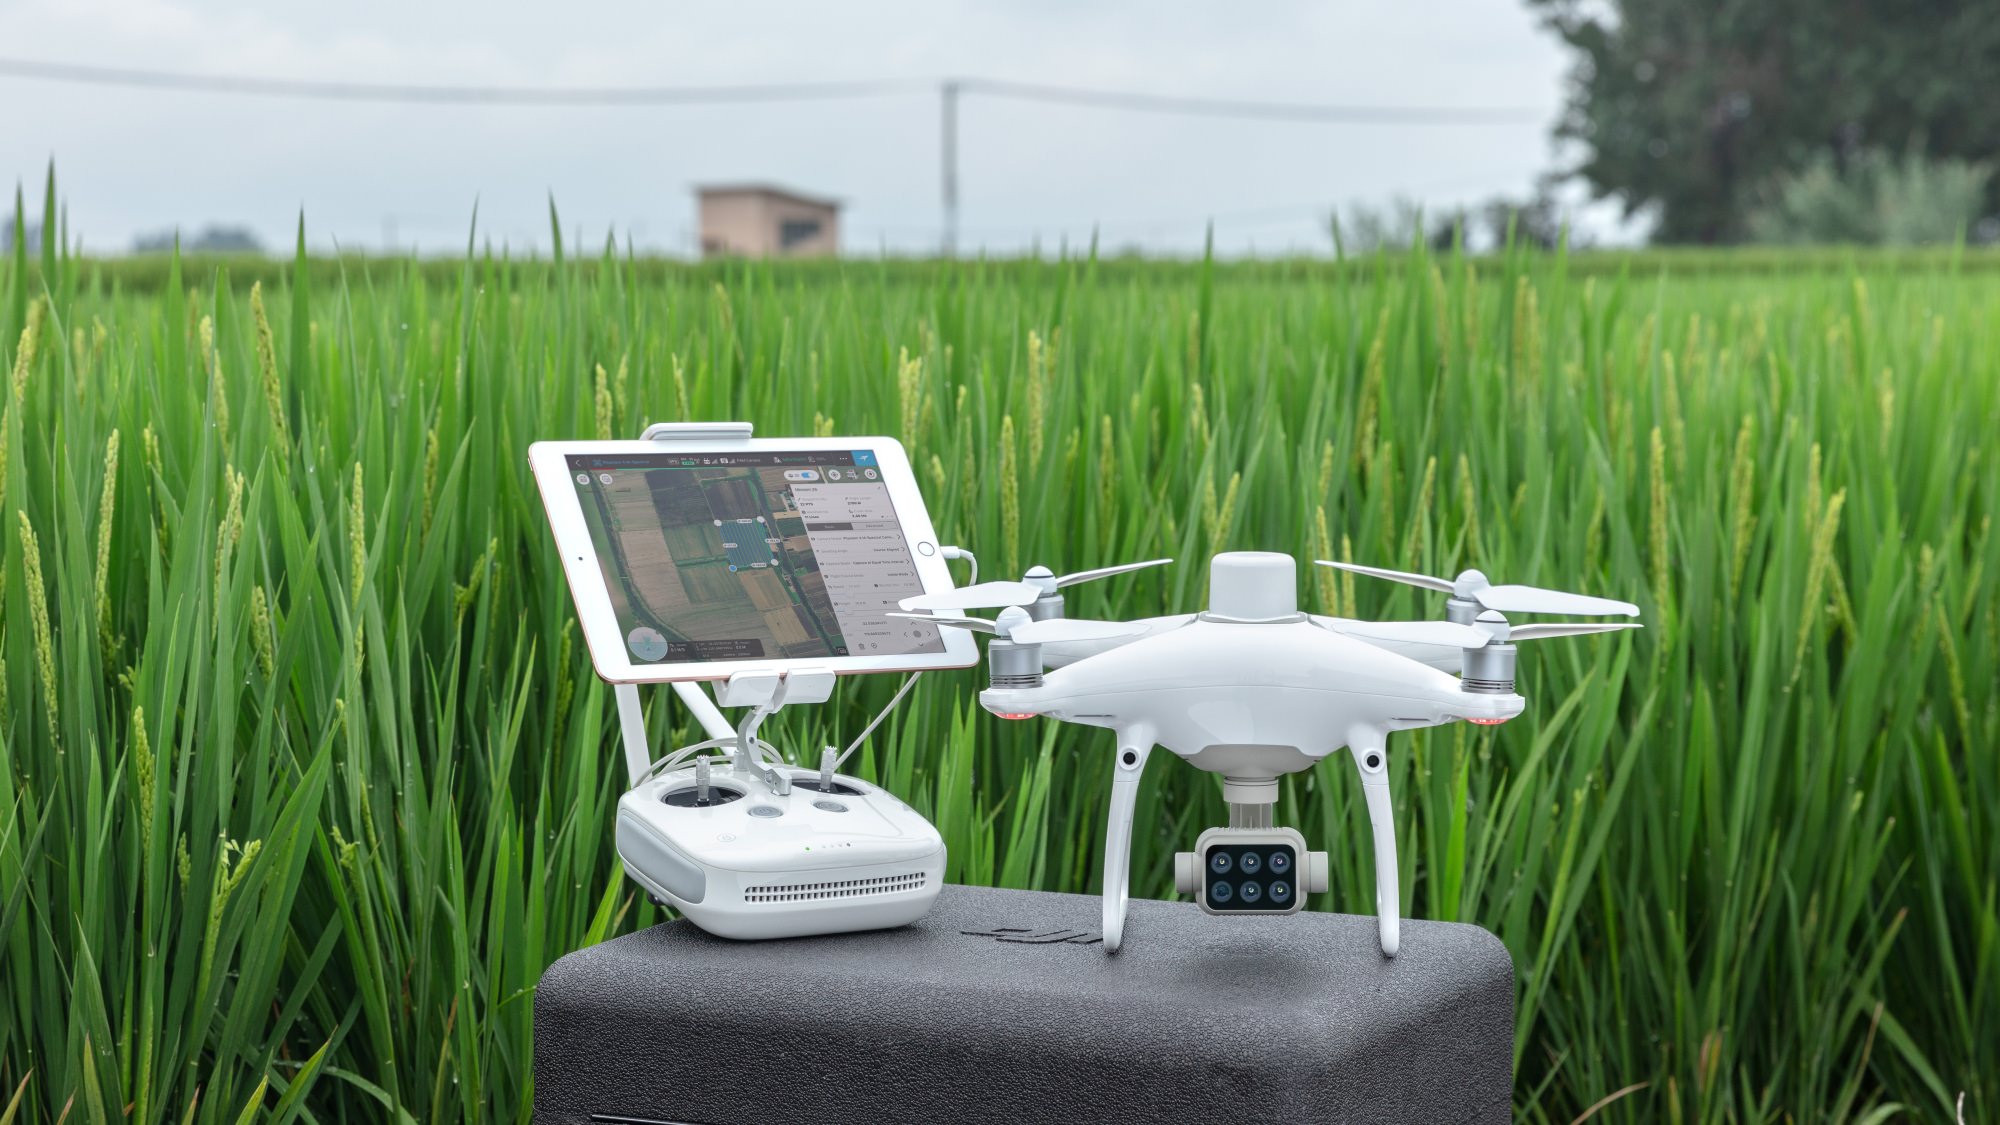 DJI P4 Multispectral for precision agriculture and land management